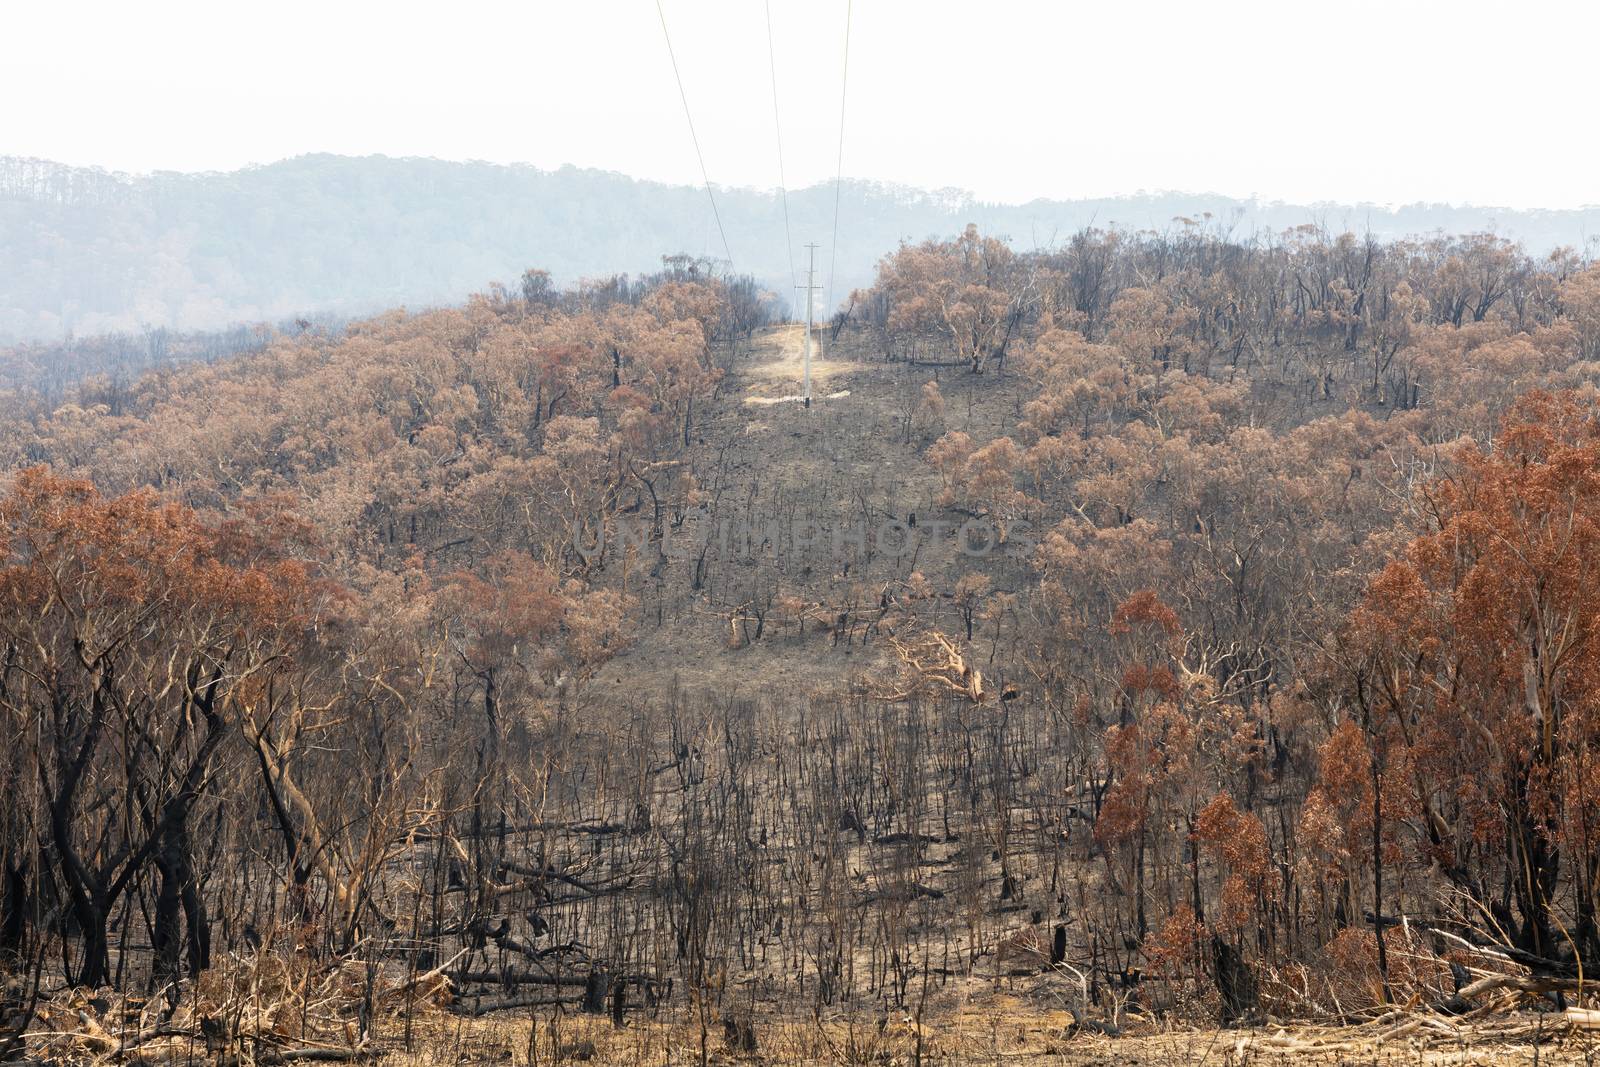 Electrical transmission lines amongst severely burnt Eucalyptus trees after a bushfire in The Blue Mountains